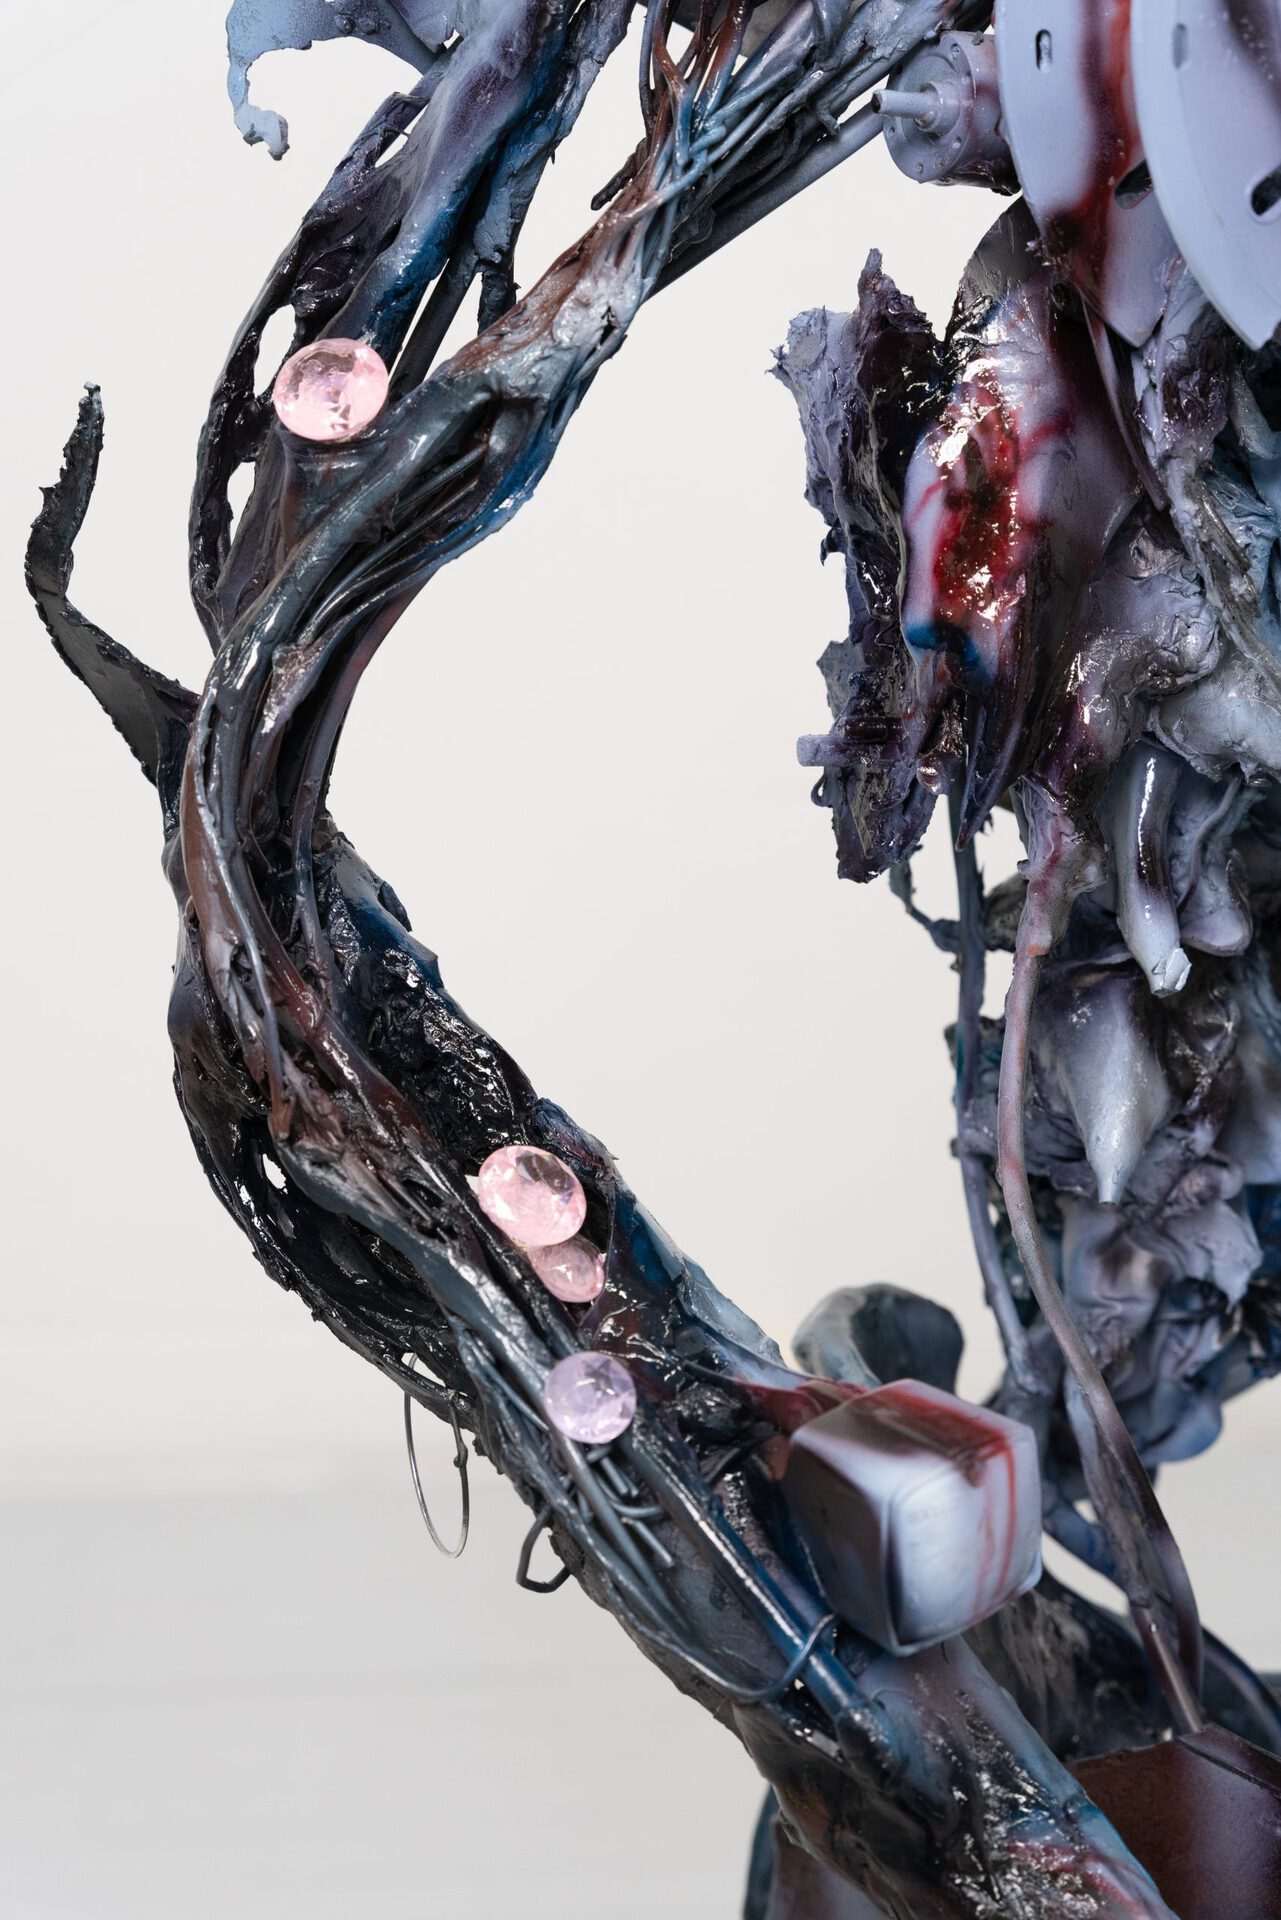 Yein Lee, Savior syndrome or good girl complex, starring perpetual past, 2022, electrical wire, epoxy putty, steel, plaster of paris, motorbi- ke parts, paint, plastic waste (detail)